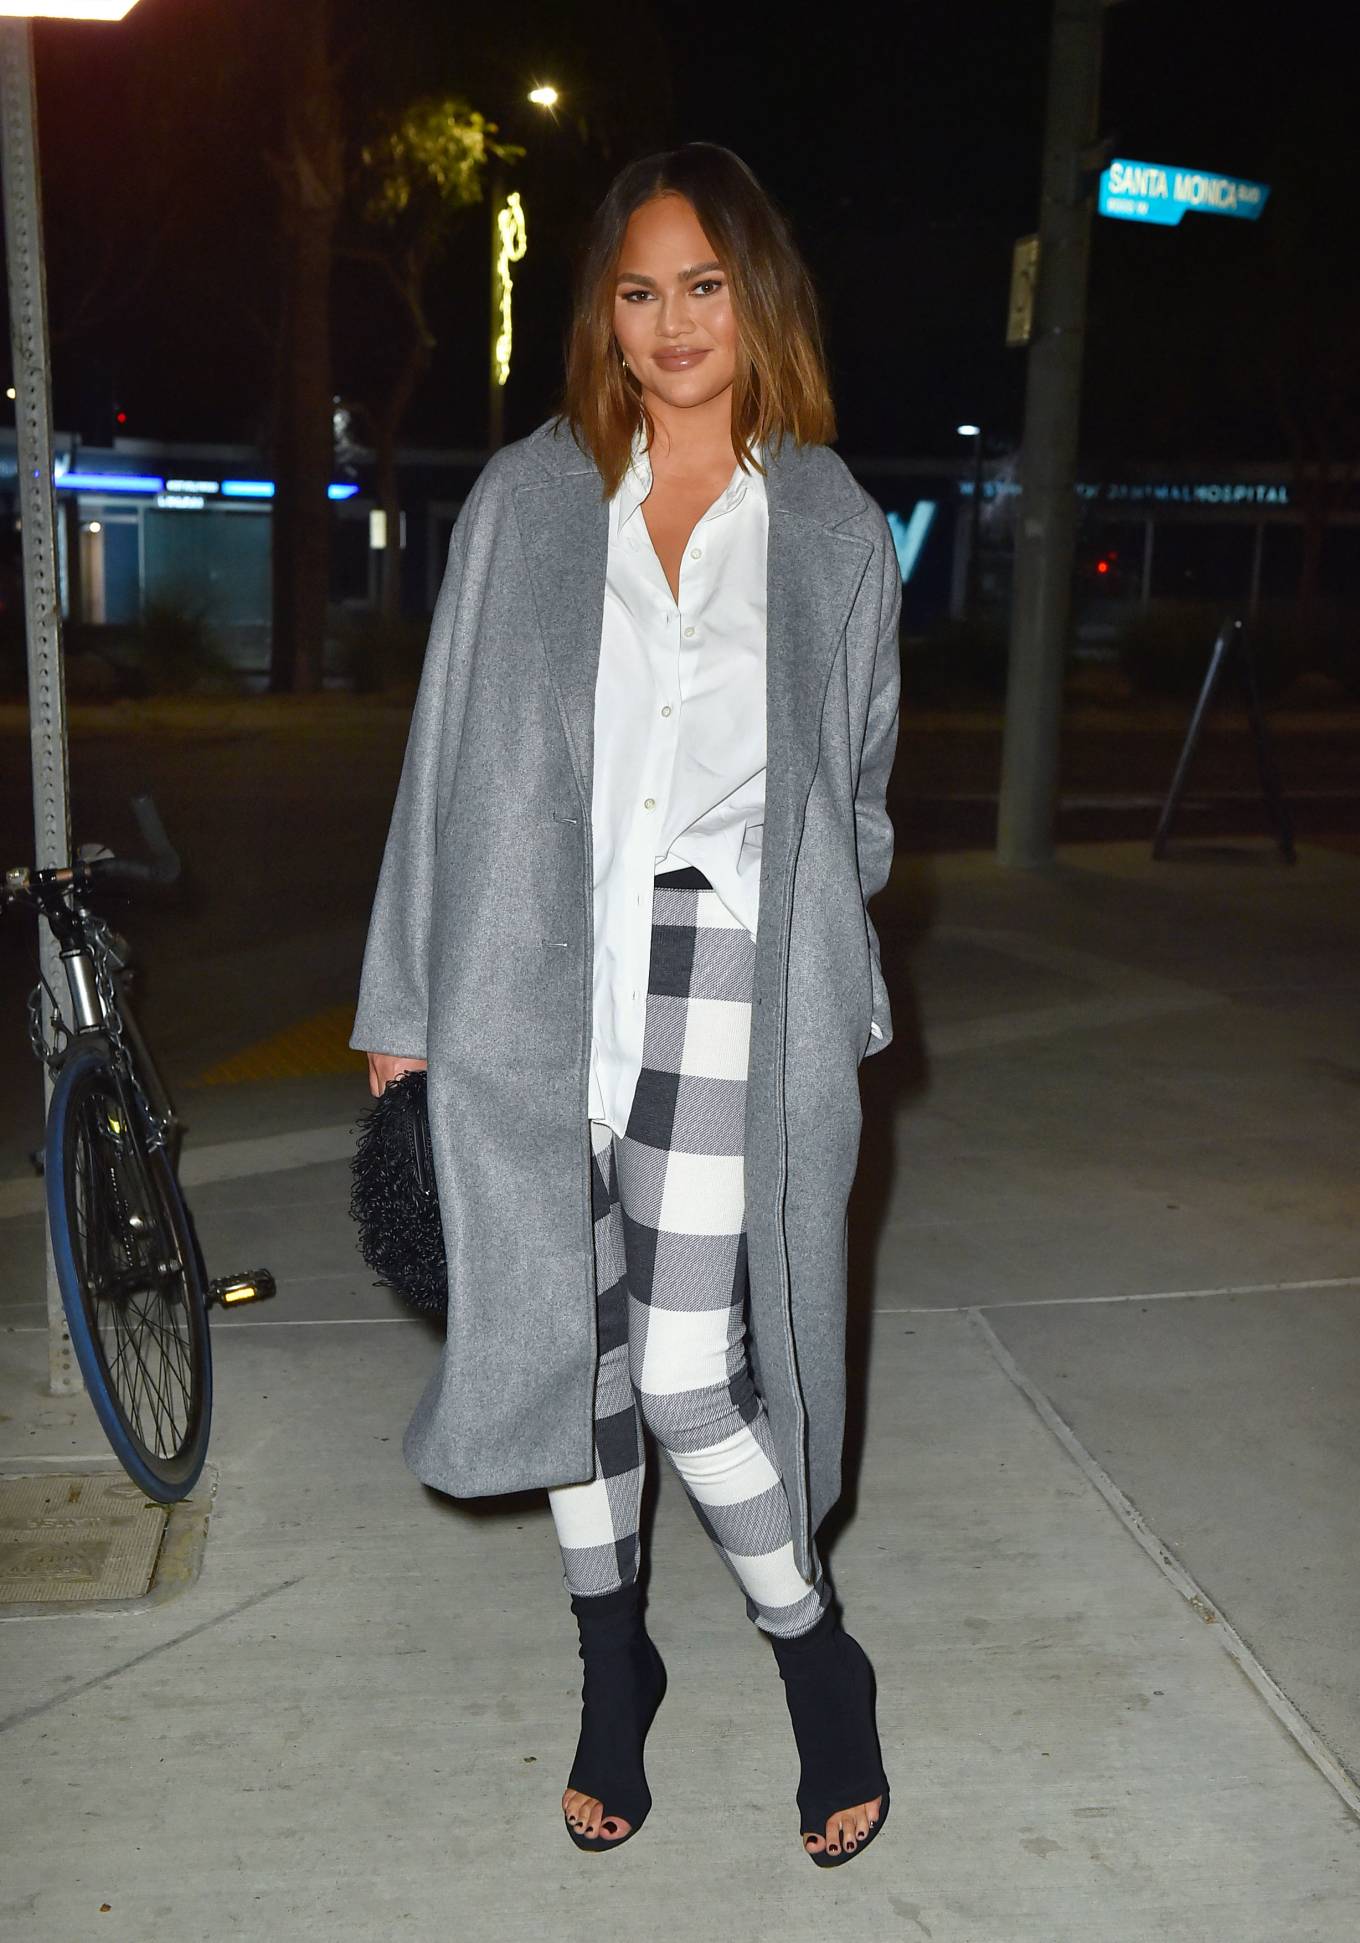 Chrissy Teigen - On a night out in West Hollywood